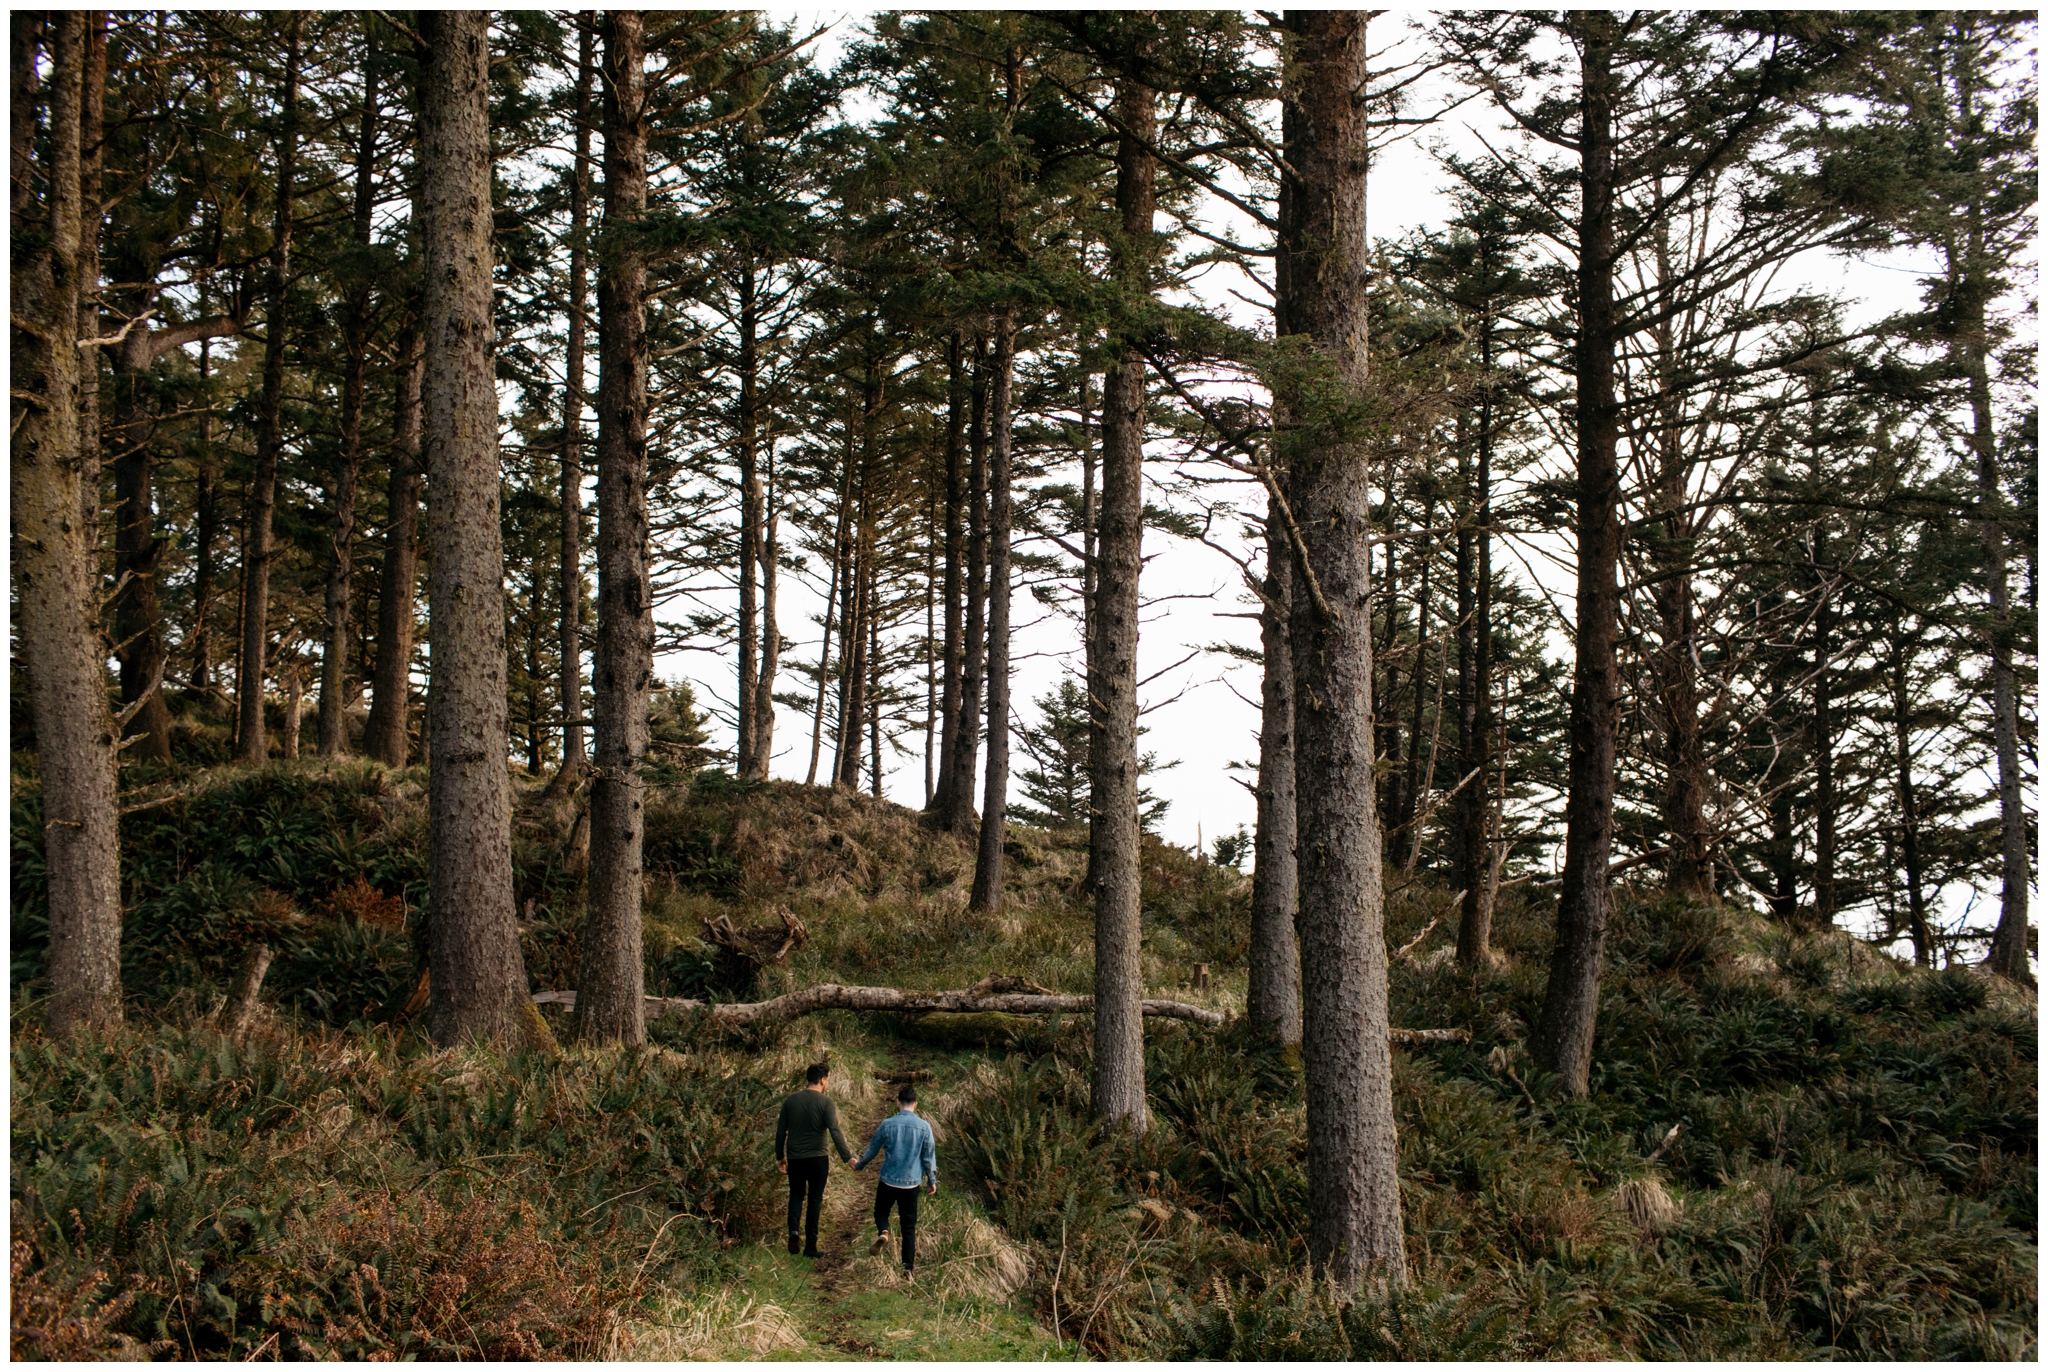 Cannon Beach Engagement With Brittney Hyatt Photography Seattle Wedding and Elopement Photographer. Same-sex couple hangs out in the woods at Ecola State Park after proposing to each other on a cliff edge looking over Cannon Beach.  